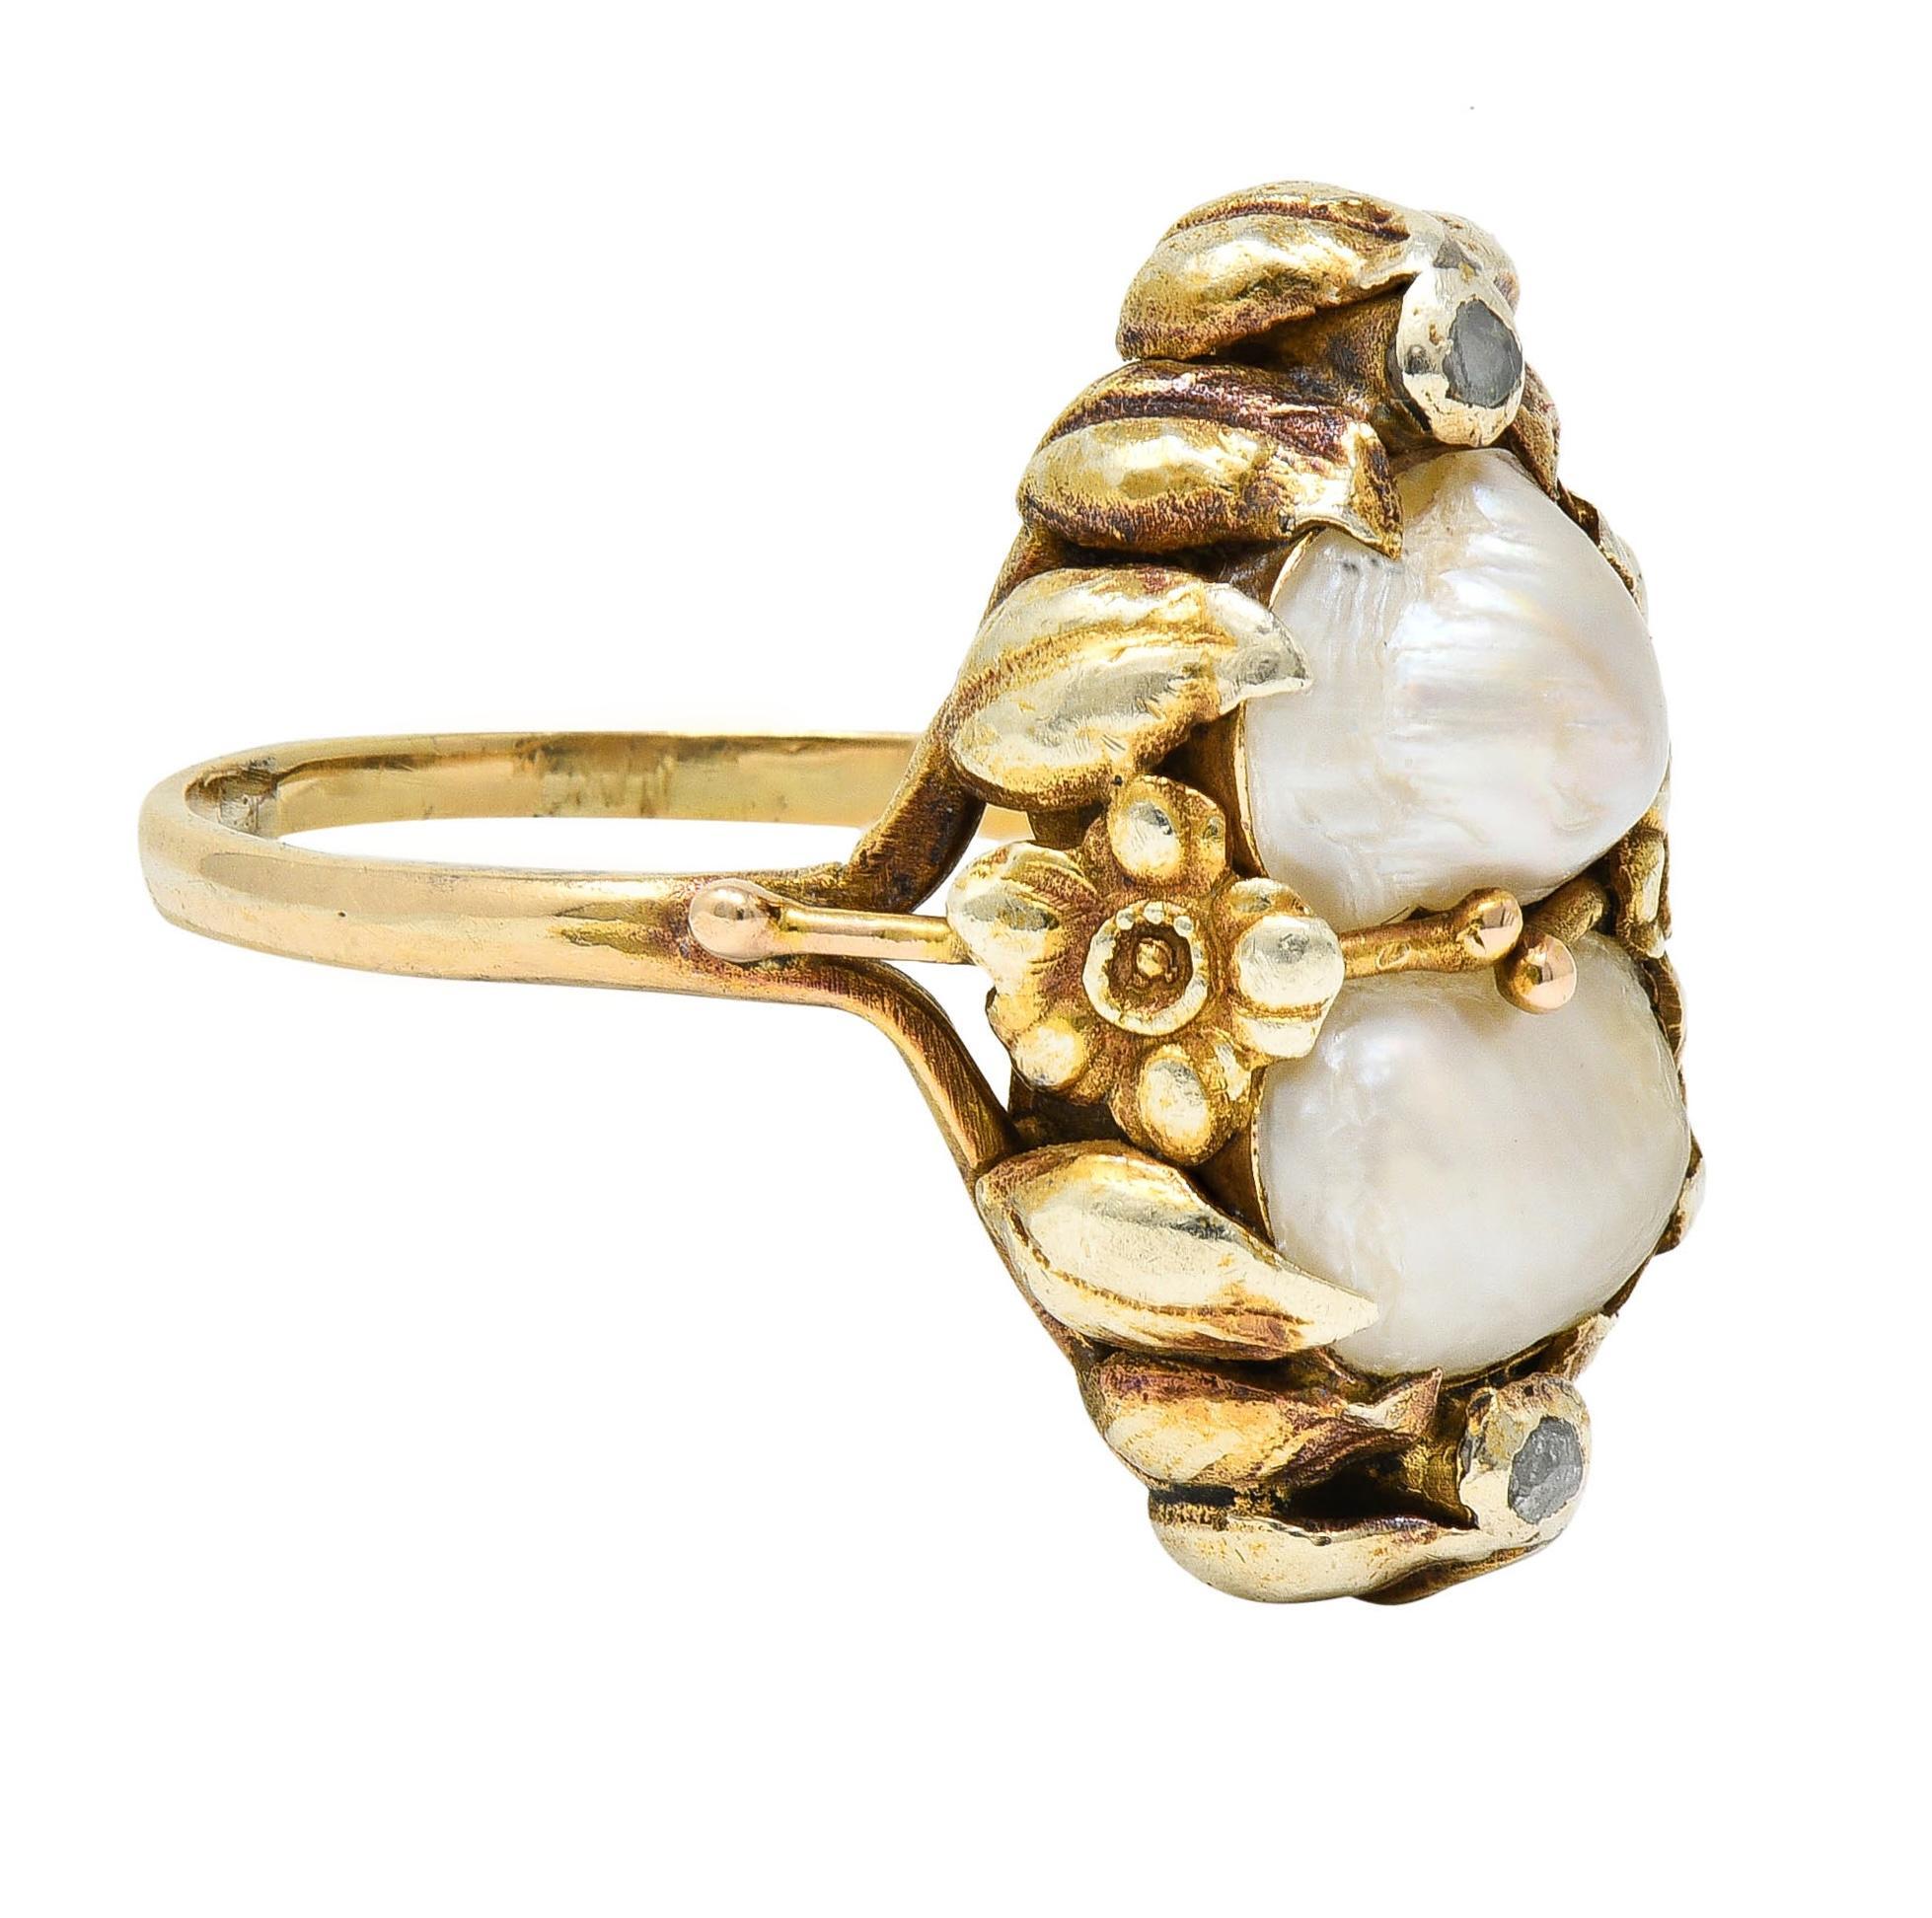 Centering two baroque pearls organically shaped and ranging in size from 5.5 to 7.5 mm 
White in body color with strong iridescence - set with stylized foliate motif prongs
Flanked north to south by approximately 0.05 carat of rose cut diamonds 
Eye